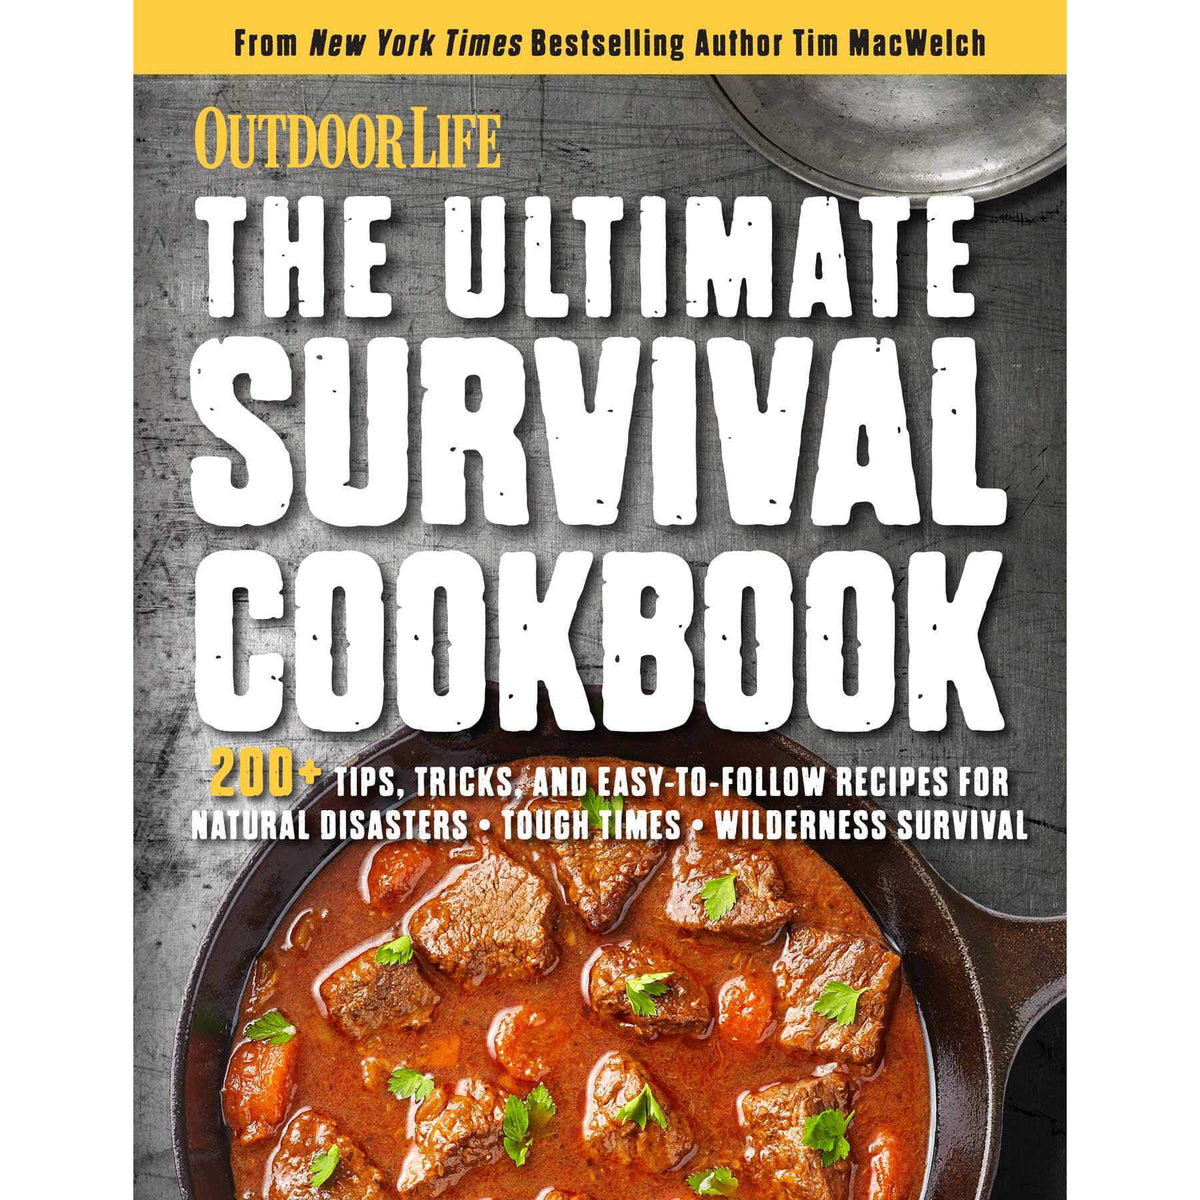 The Ultimate Survival Cookbook front cover.